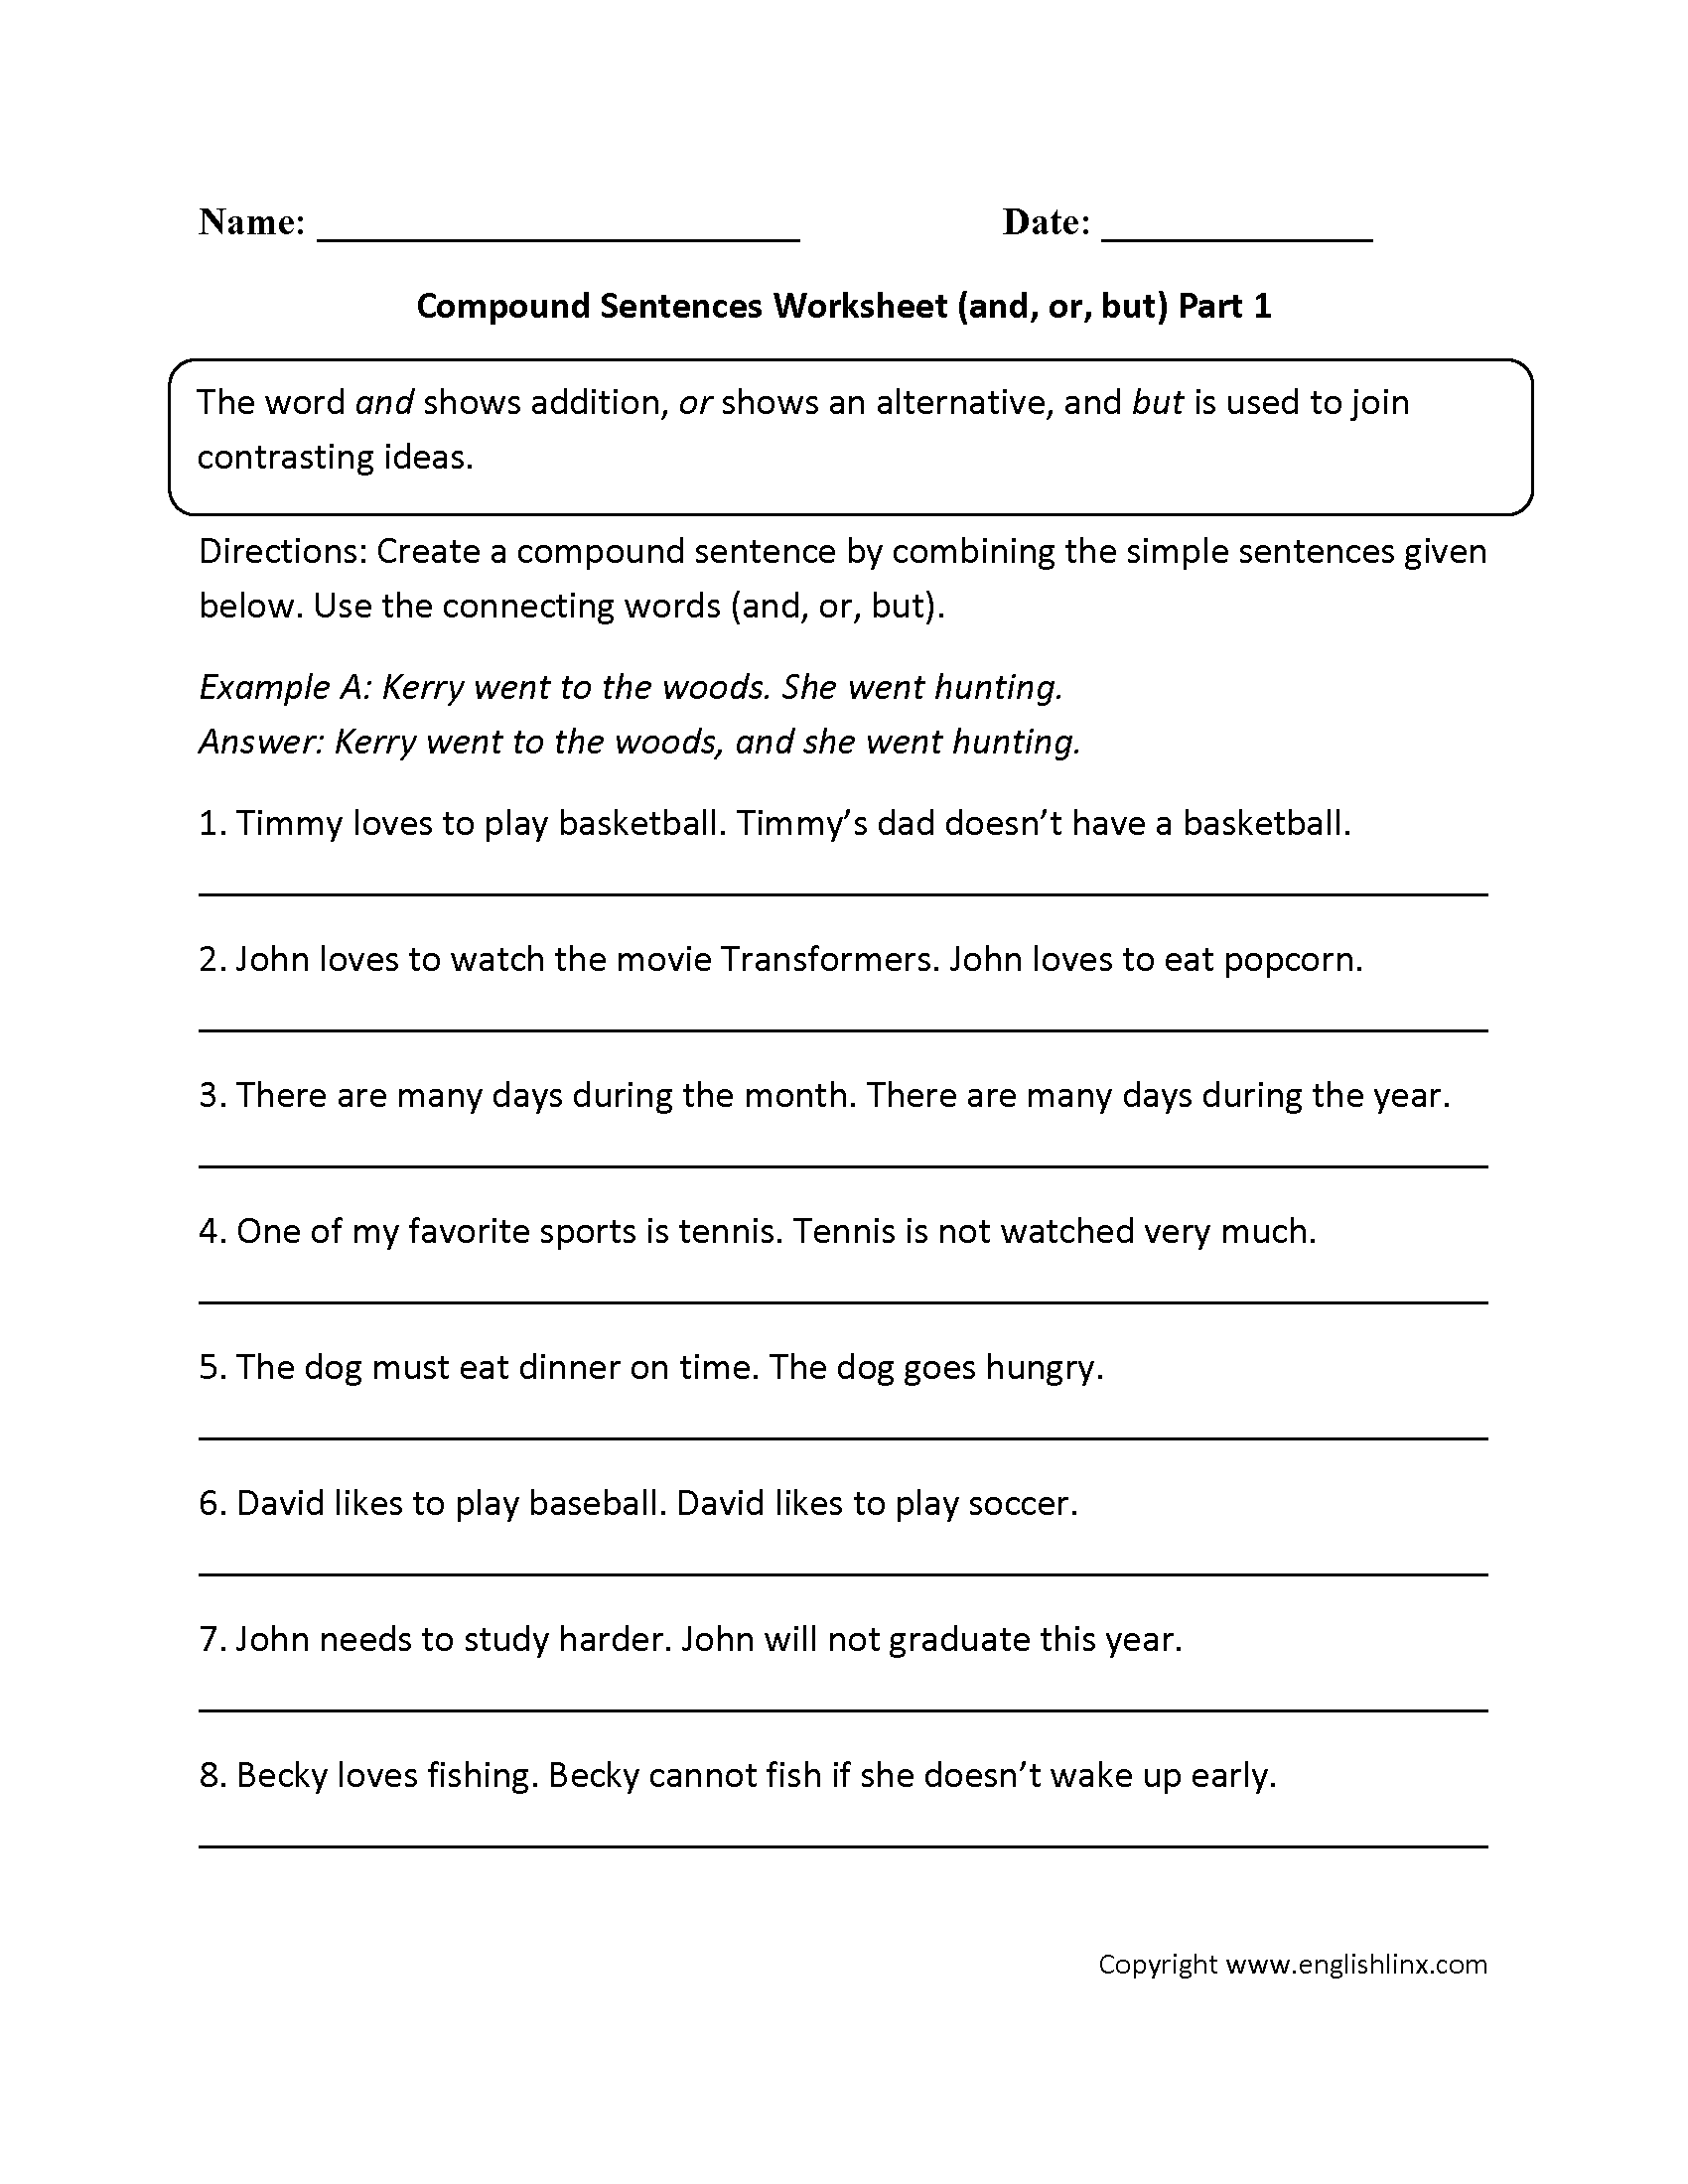 Compound Sentences Worksheets And Or And But Compound Sentences Worksheet